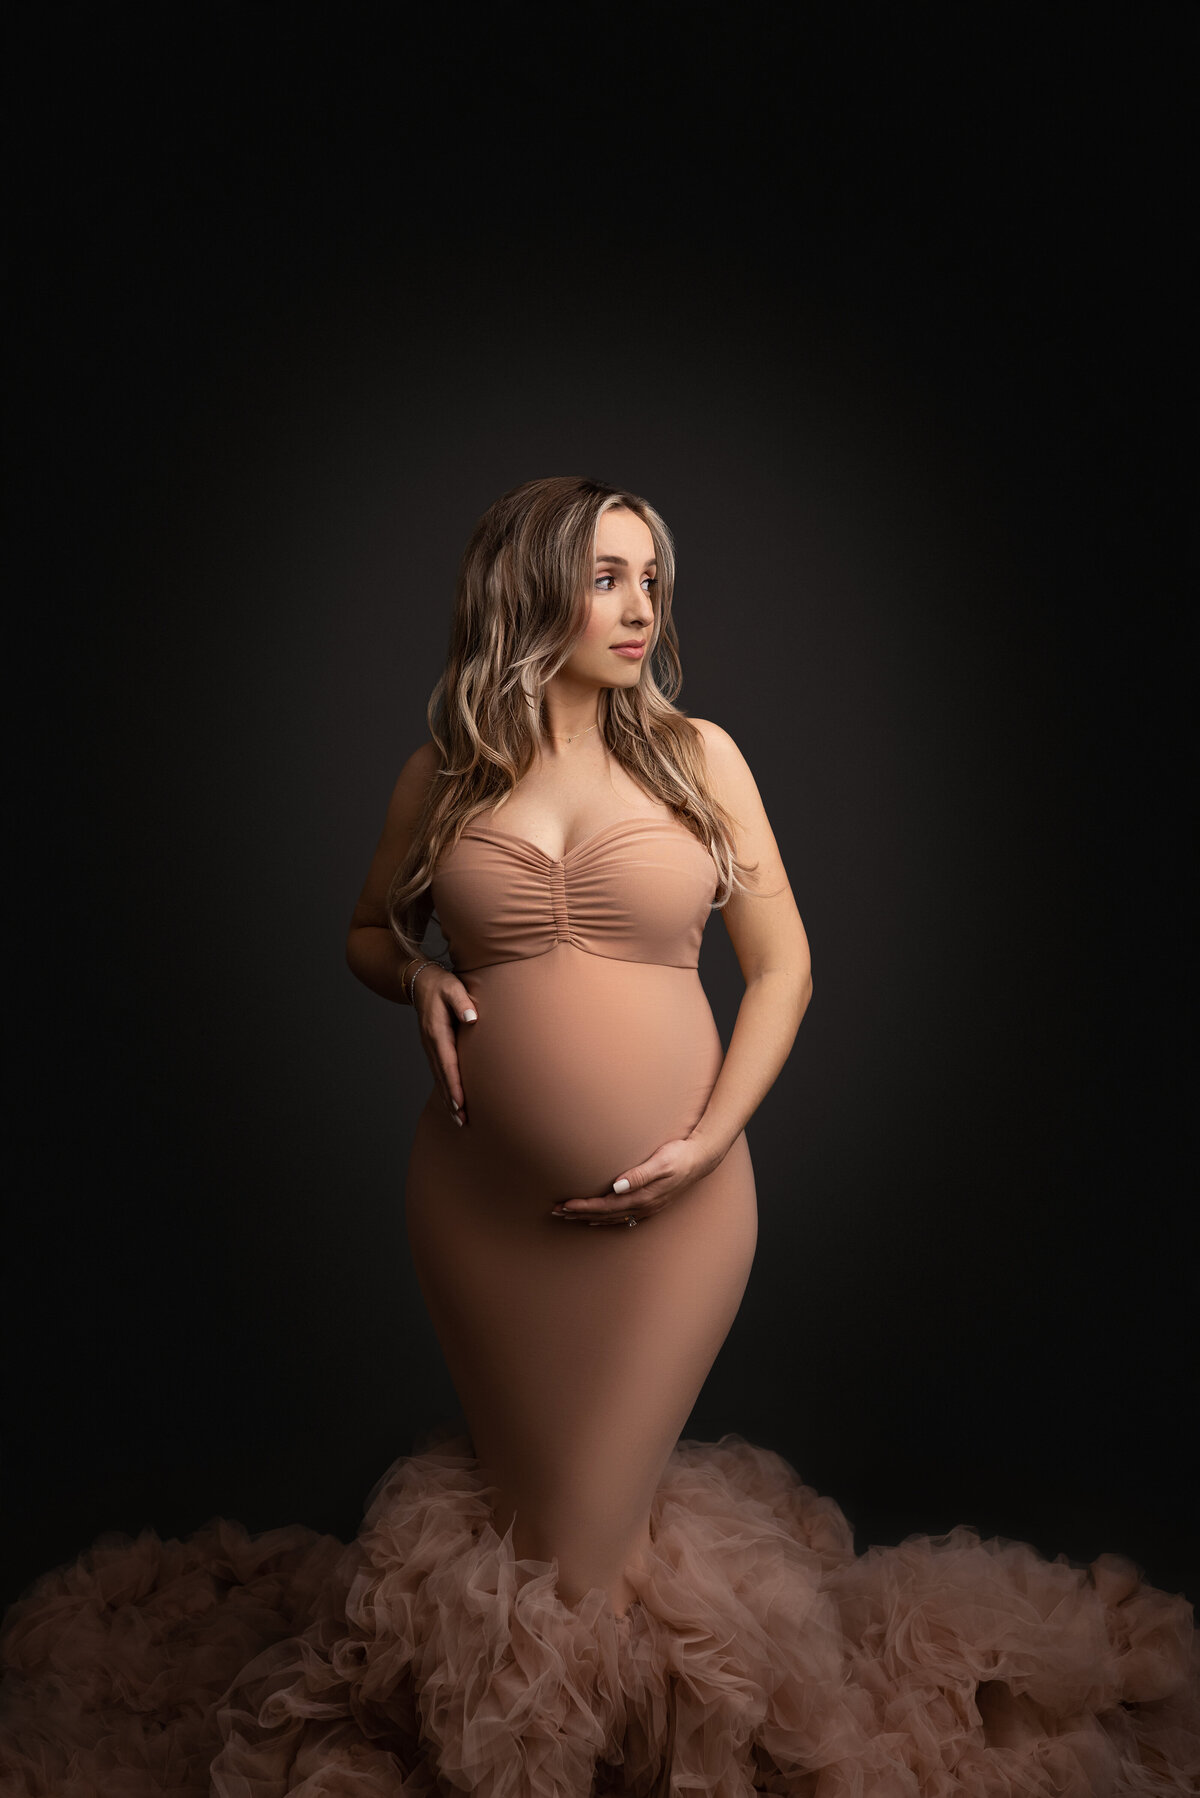 Maternity photo taken by Katie Marshall, recognized as the best Main Line maternity photographer. The image showcases a woman standing against a grey background, gracefully dressed in a dark dusky blush body-con maternity gown featuring tulle ruching at the bottom. One of her hands tenderly cradles her baby bump, while the other rests gently at her side. She gazes over her shoulder, looking toward the distant light source, creating a graceful and timeless maternity portrait.